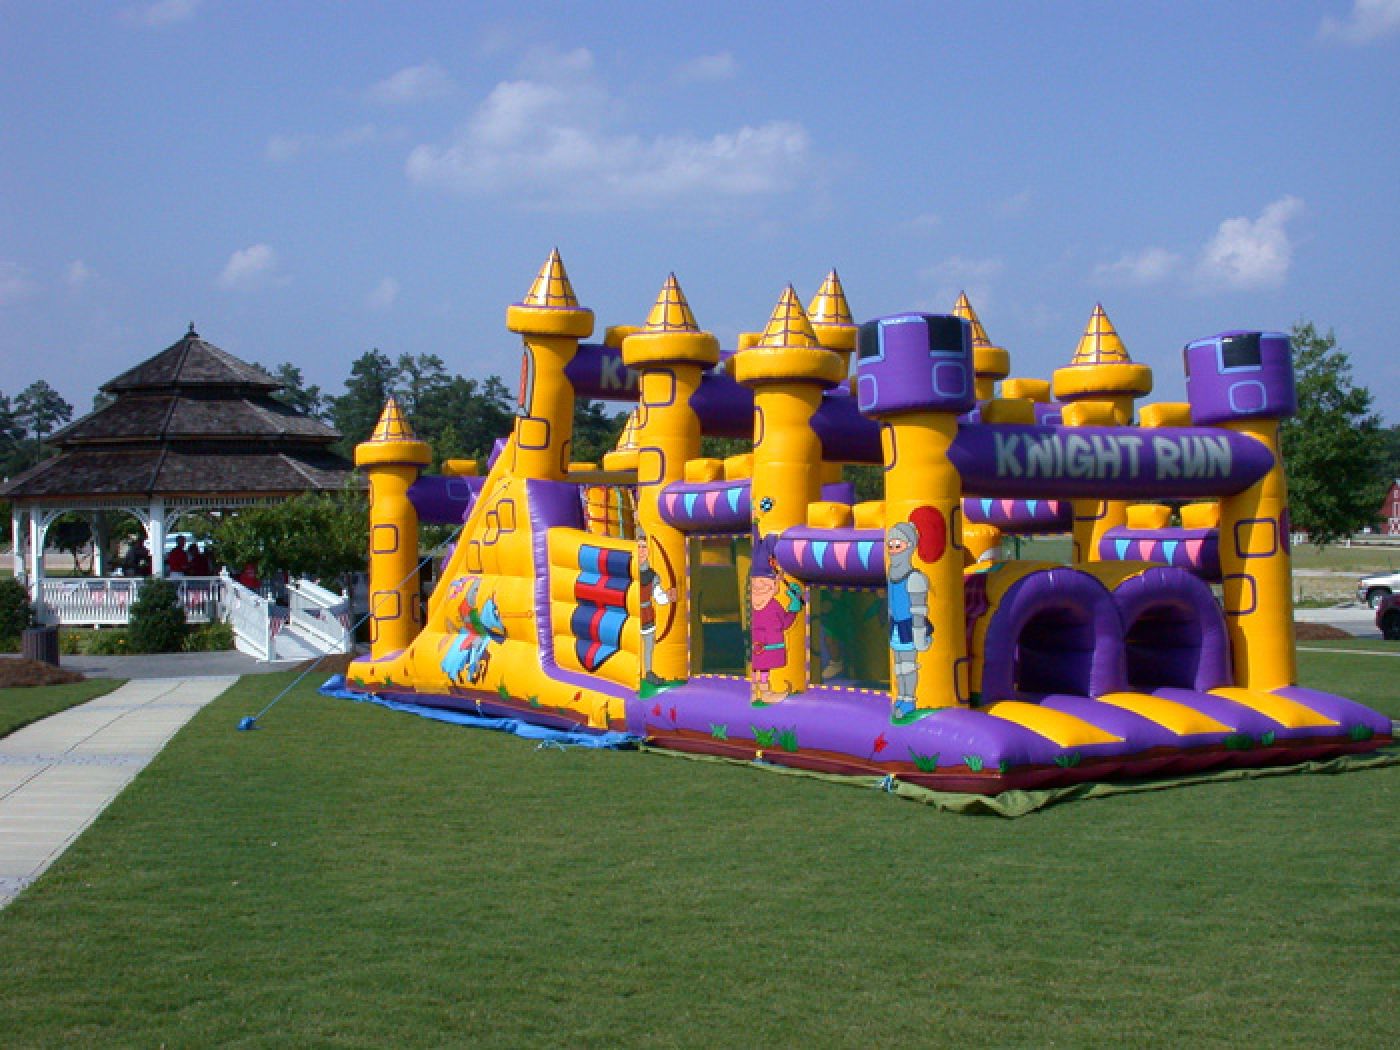 Knight Run Obstacle Course Inflatable Ride Setup in Cary NC